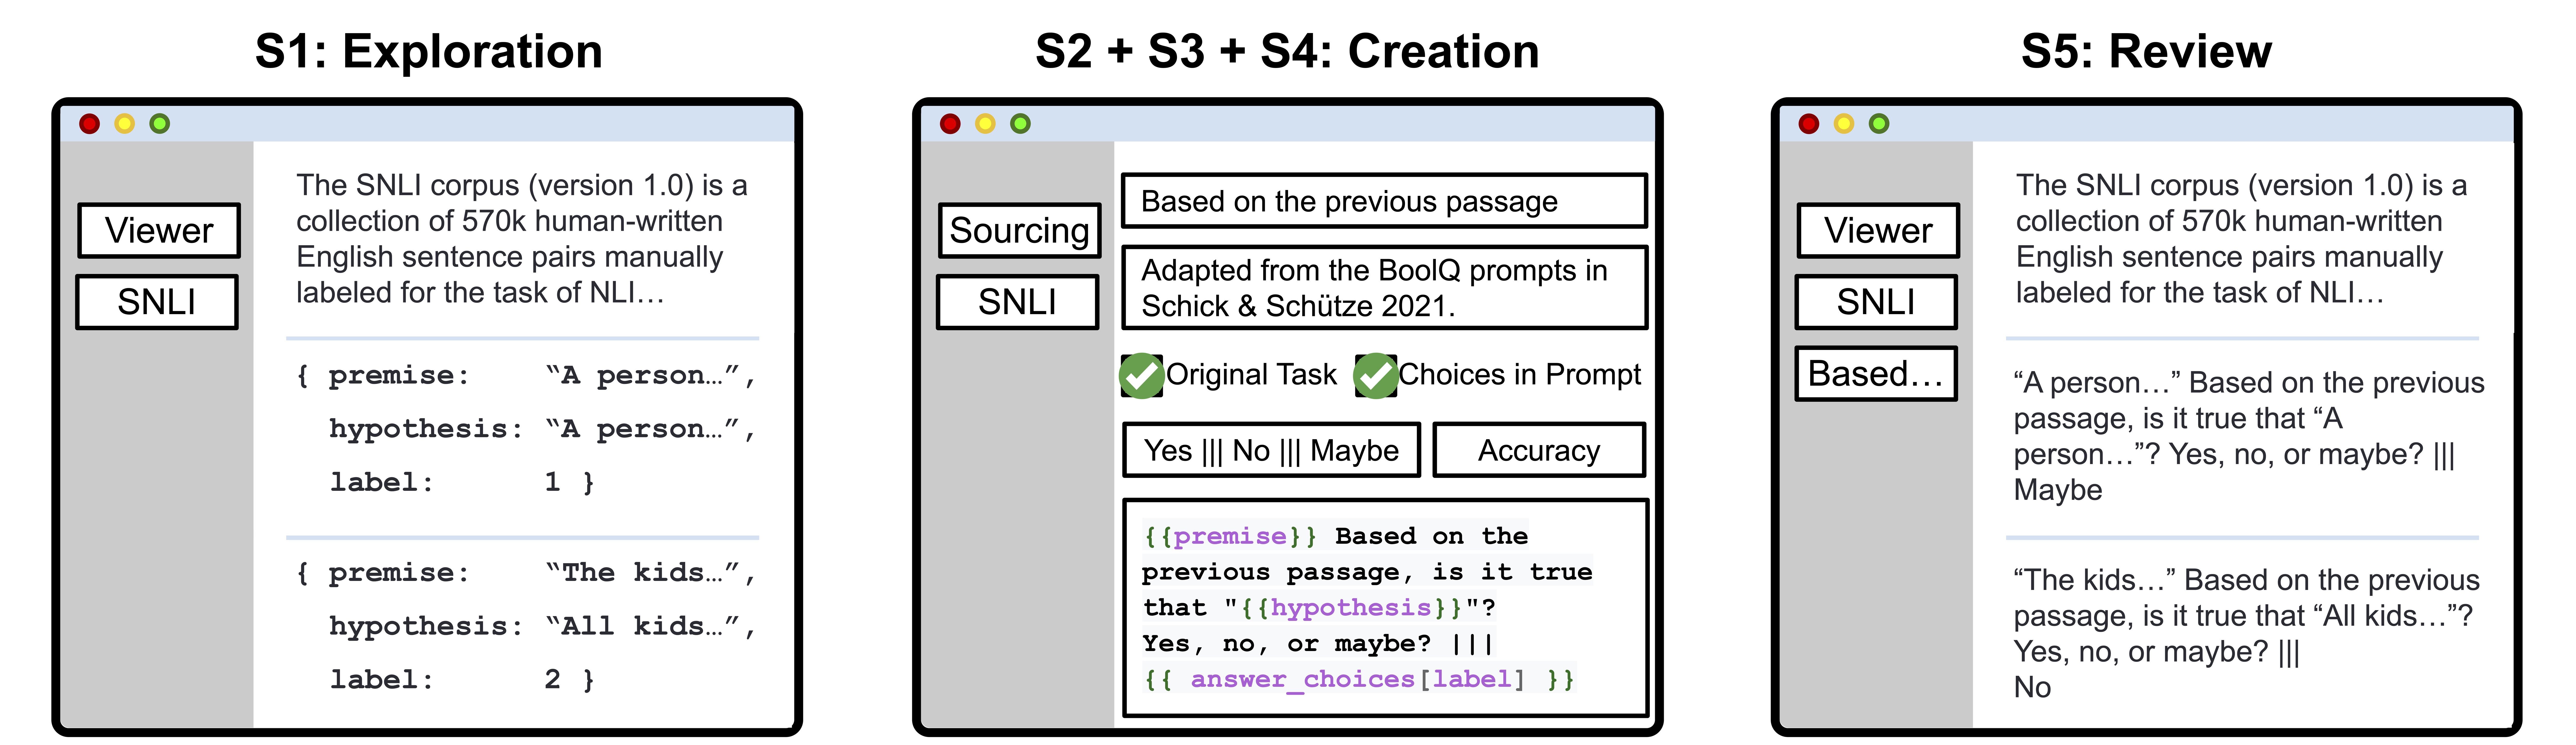 PromptSource ACL Demo Figure.png